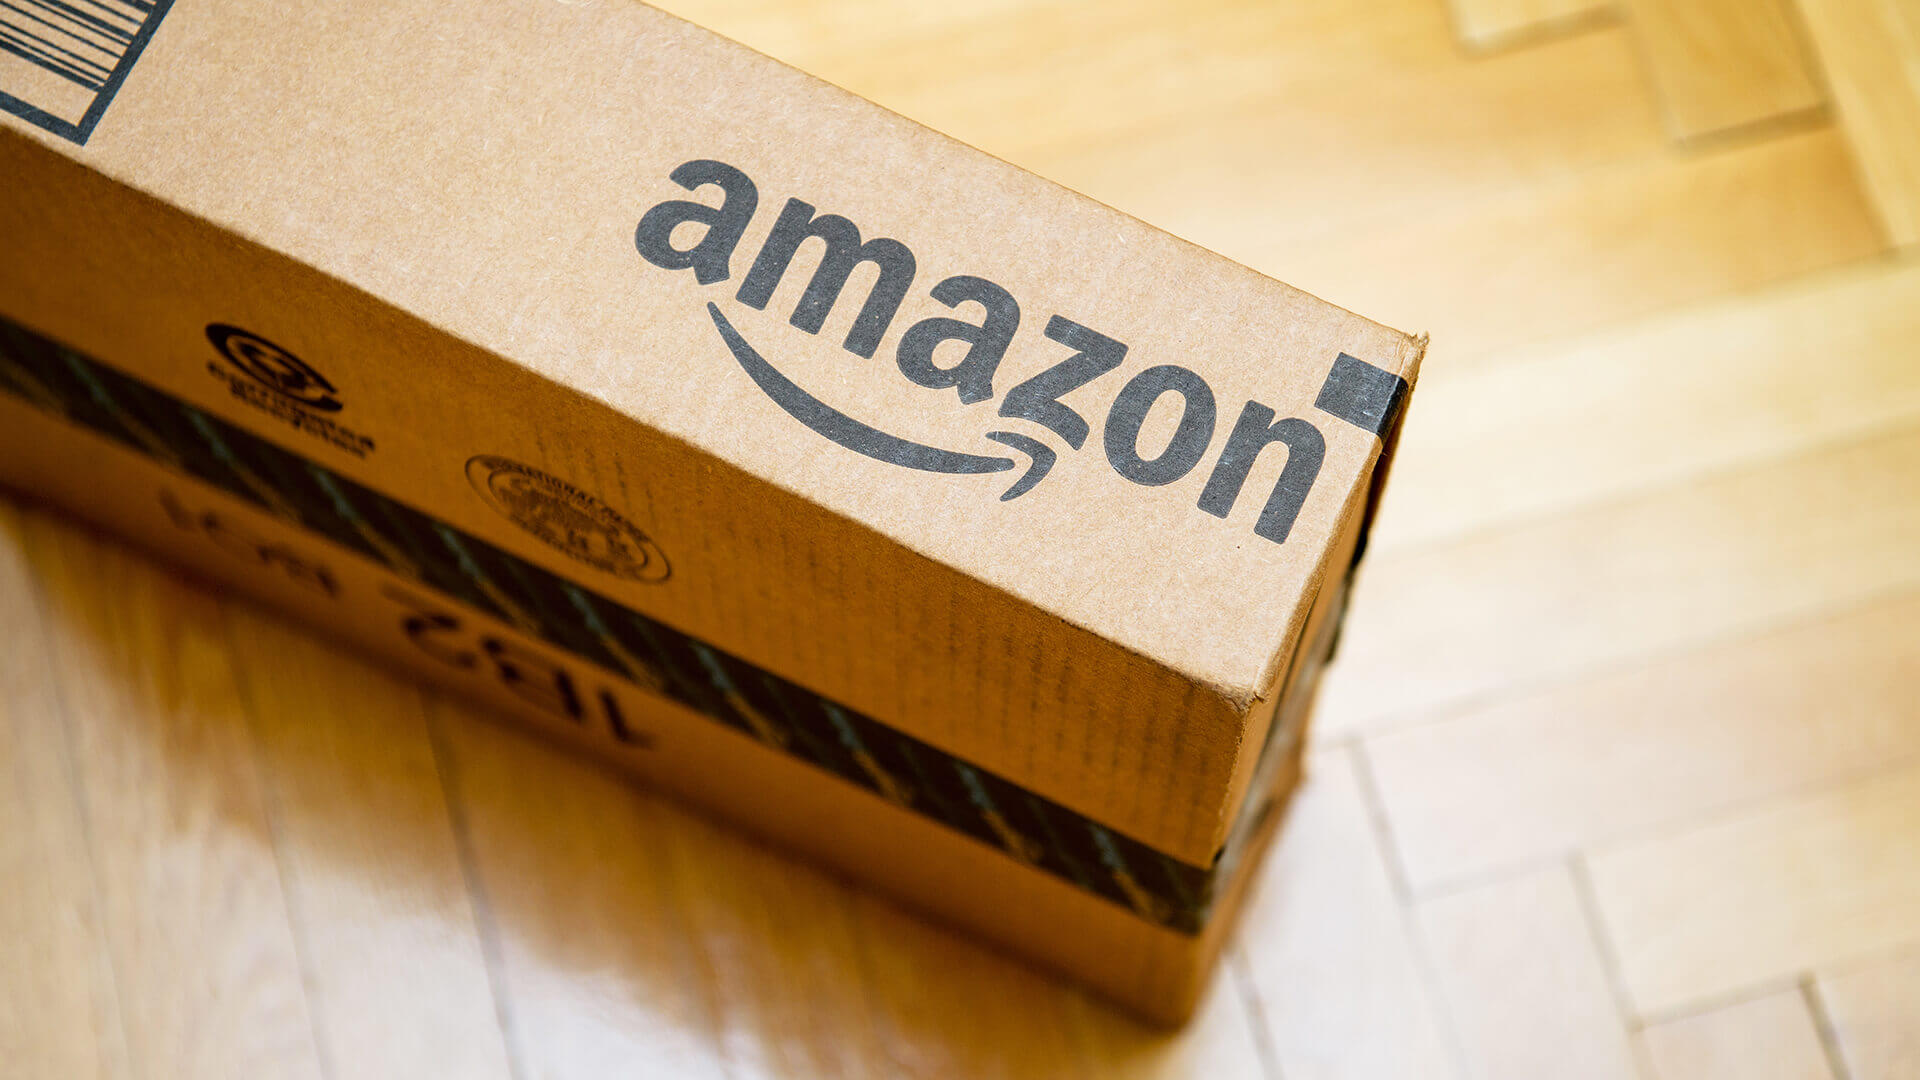 Amazon sellers can now use AI to write product titles & descriptions